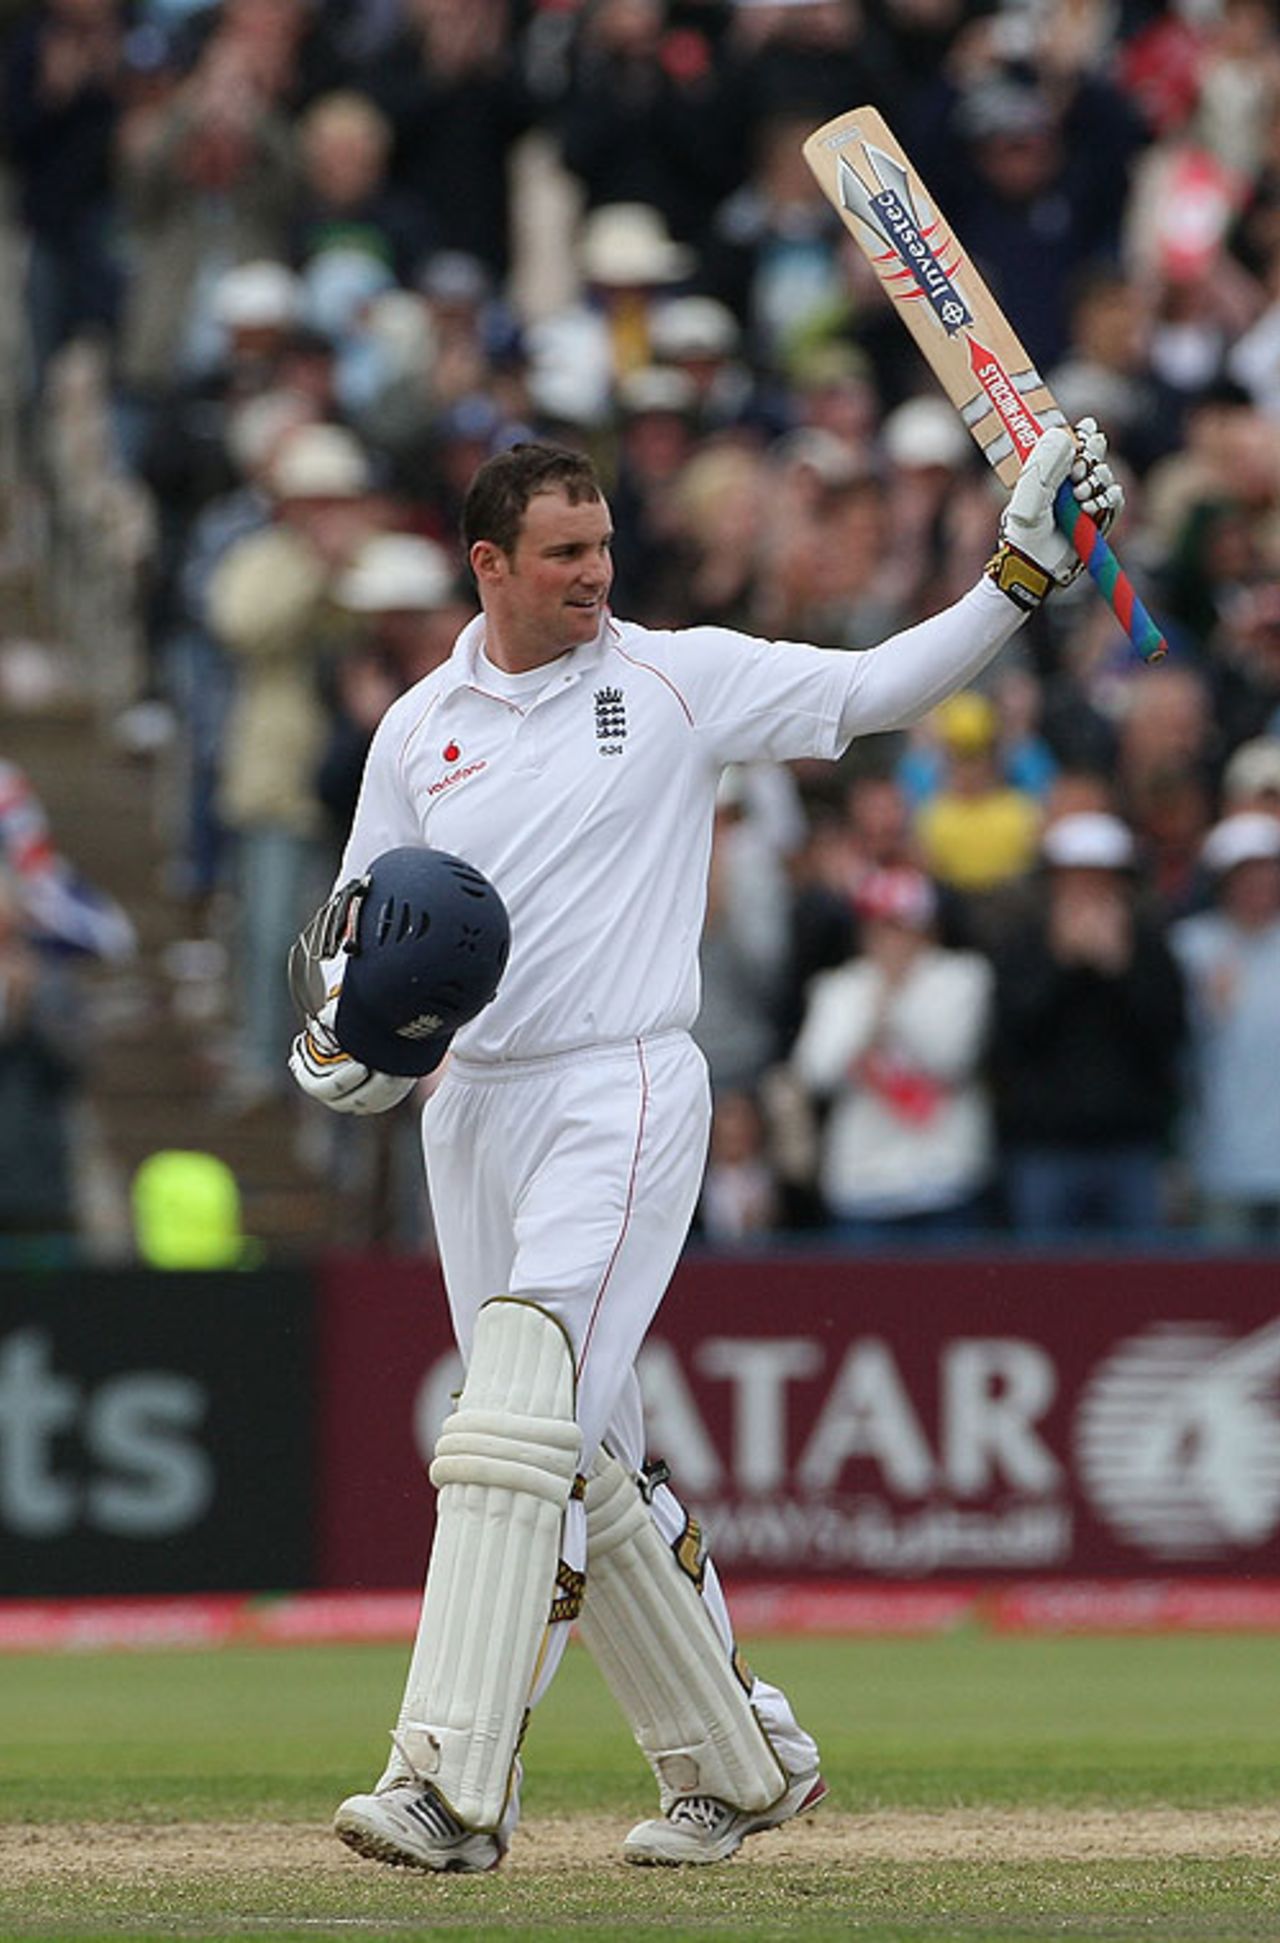 Andrew Strauss salutes the crowd after reaching his 12th Test century, England v New Zealand, 2nd Test, Old Trafford, May 25, 2008